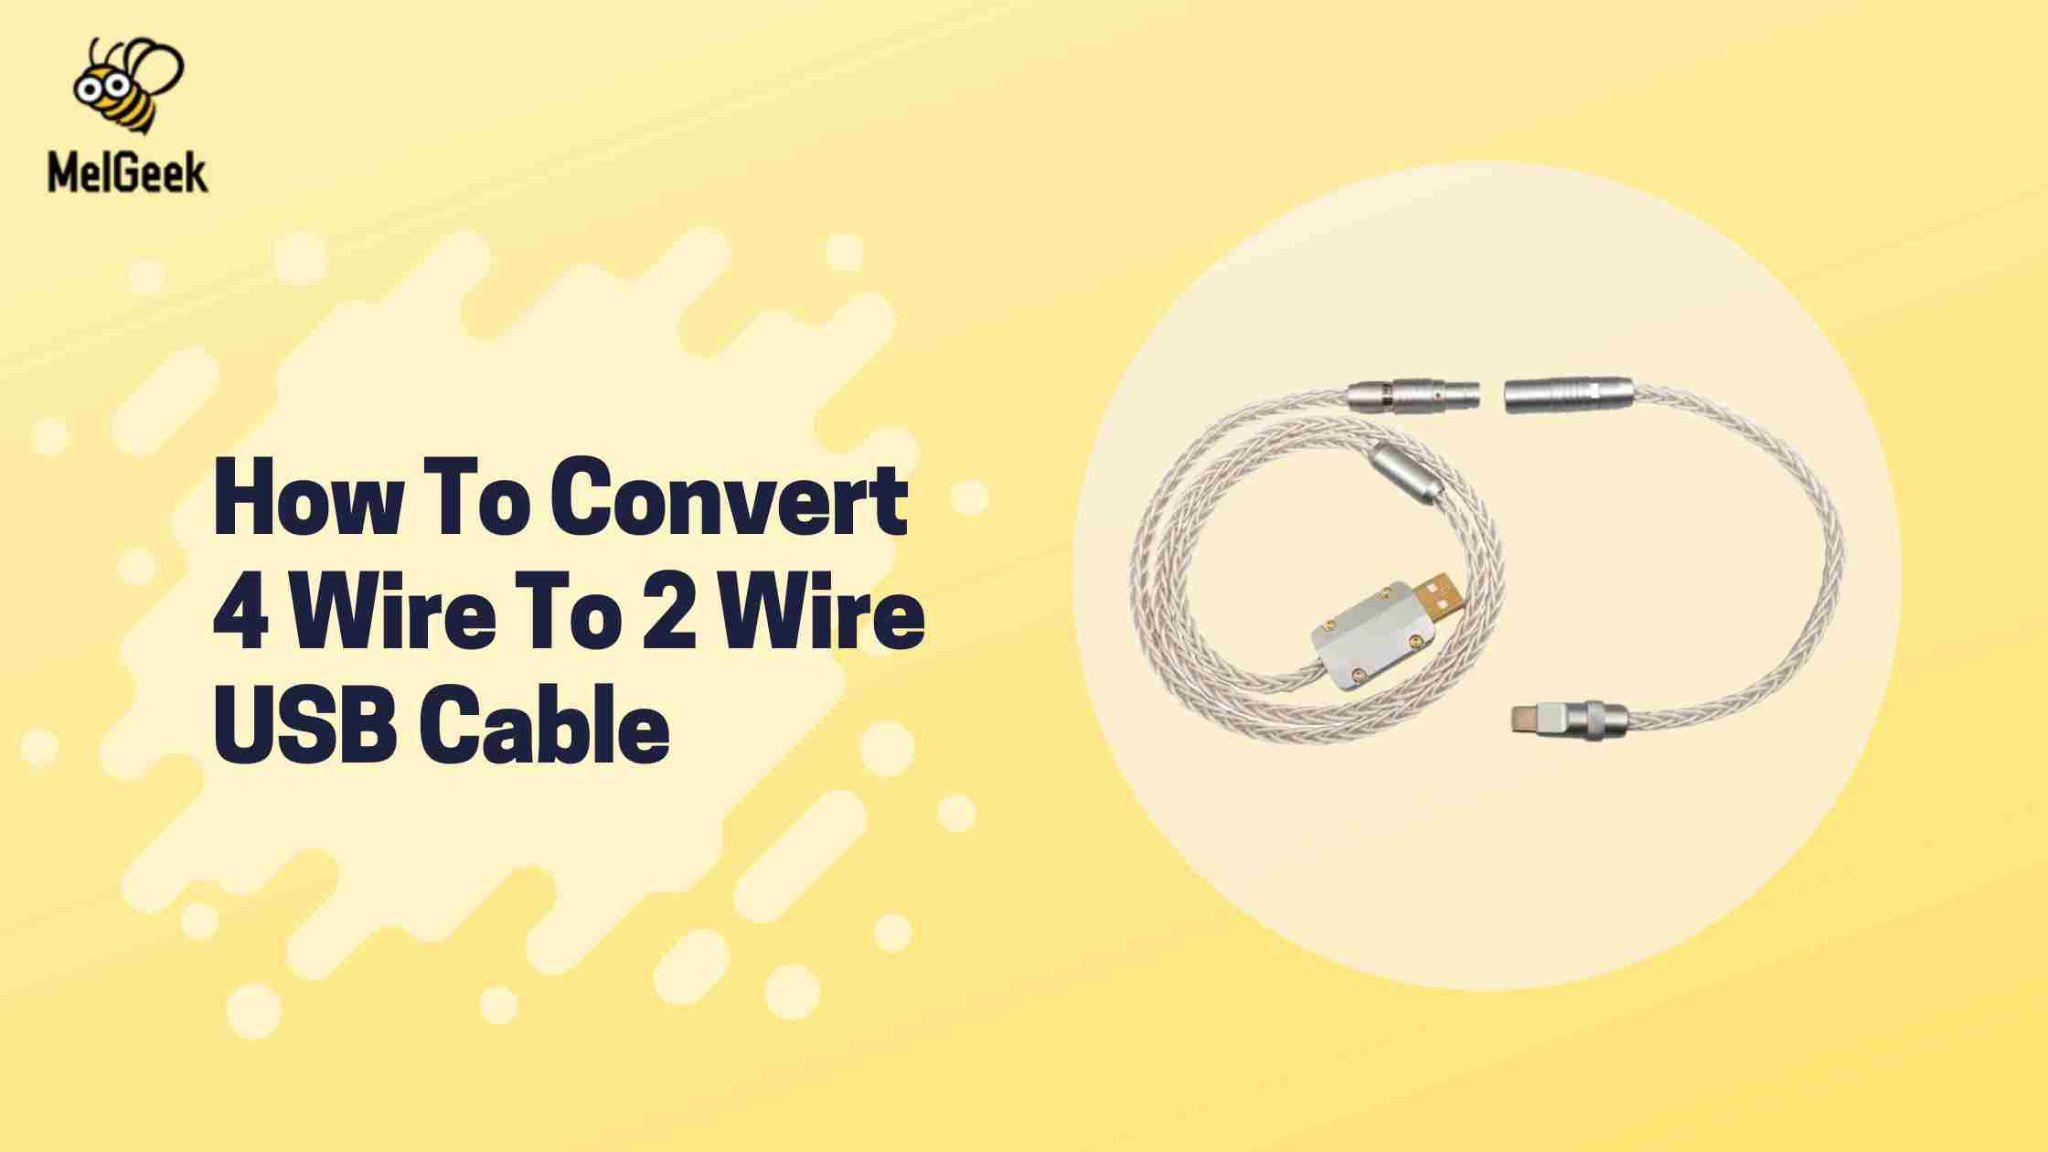 How To Convert 4 Wire To 2 Wire USB Cable